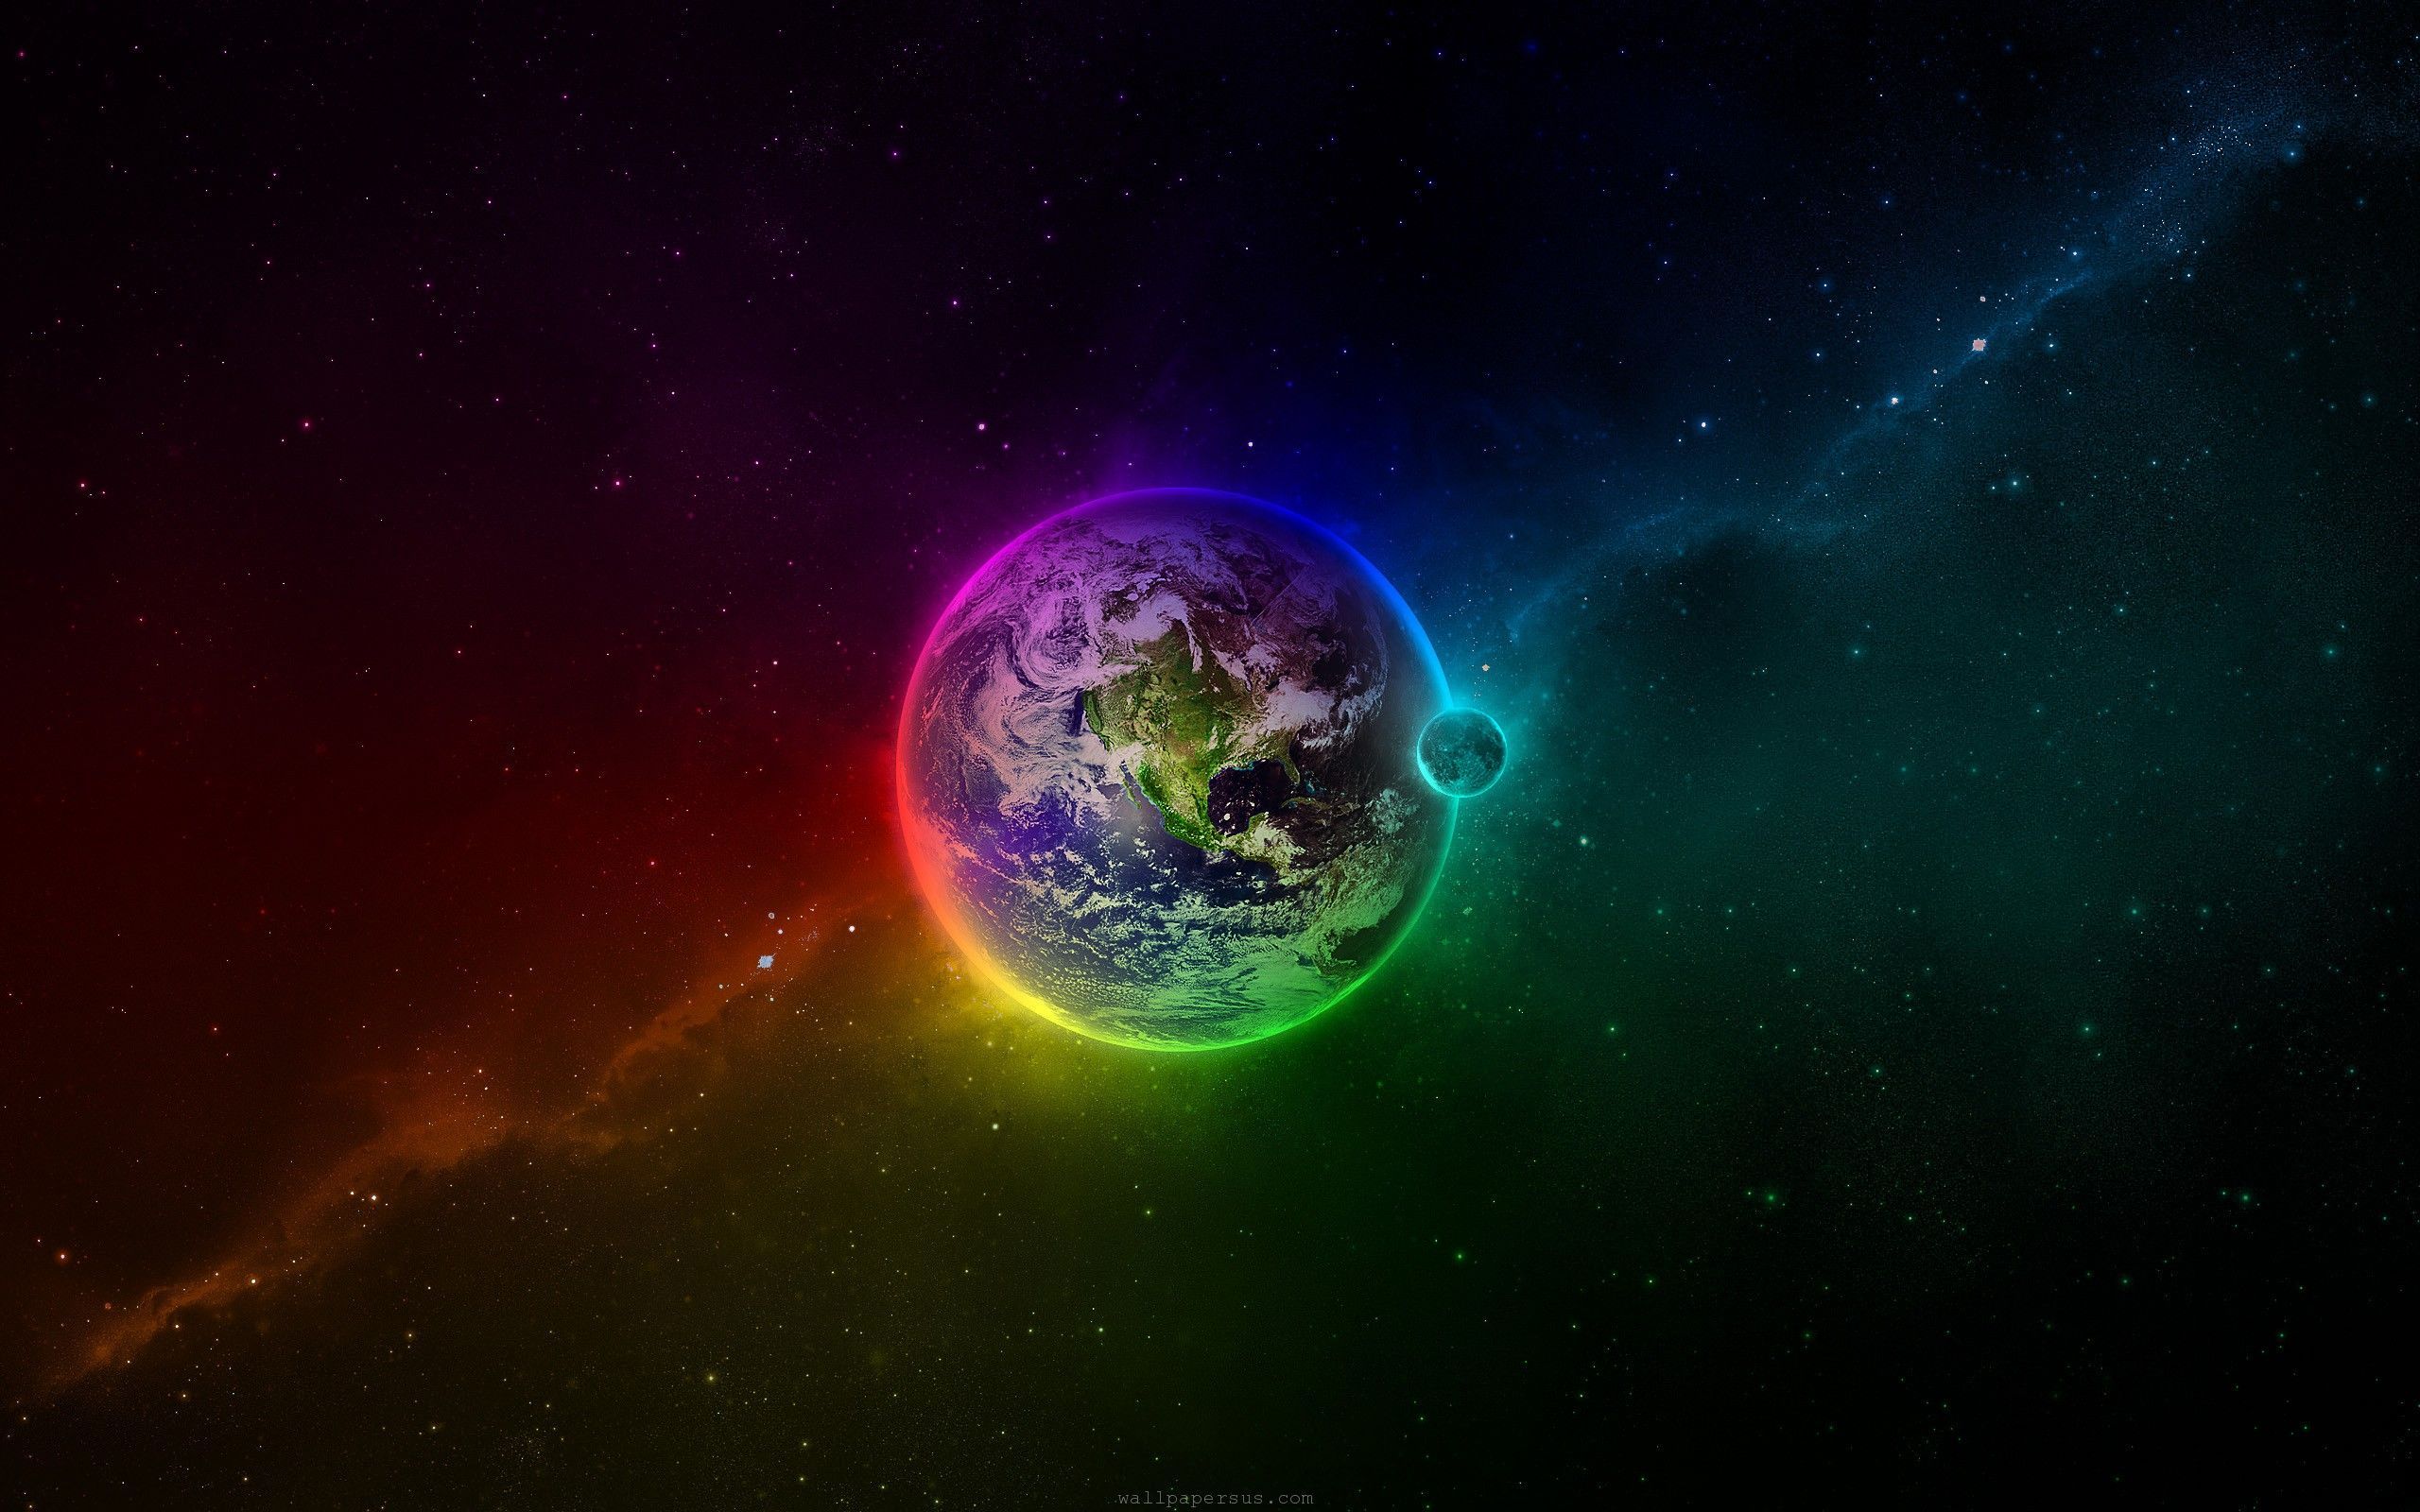 rainbow wrist corsage. Big Earth. Background HD wallpaper, Earth from space, Rainbow warrior